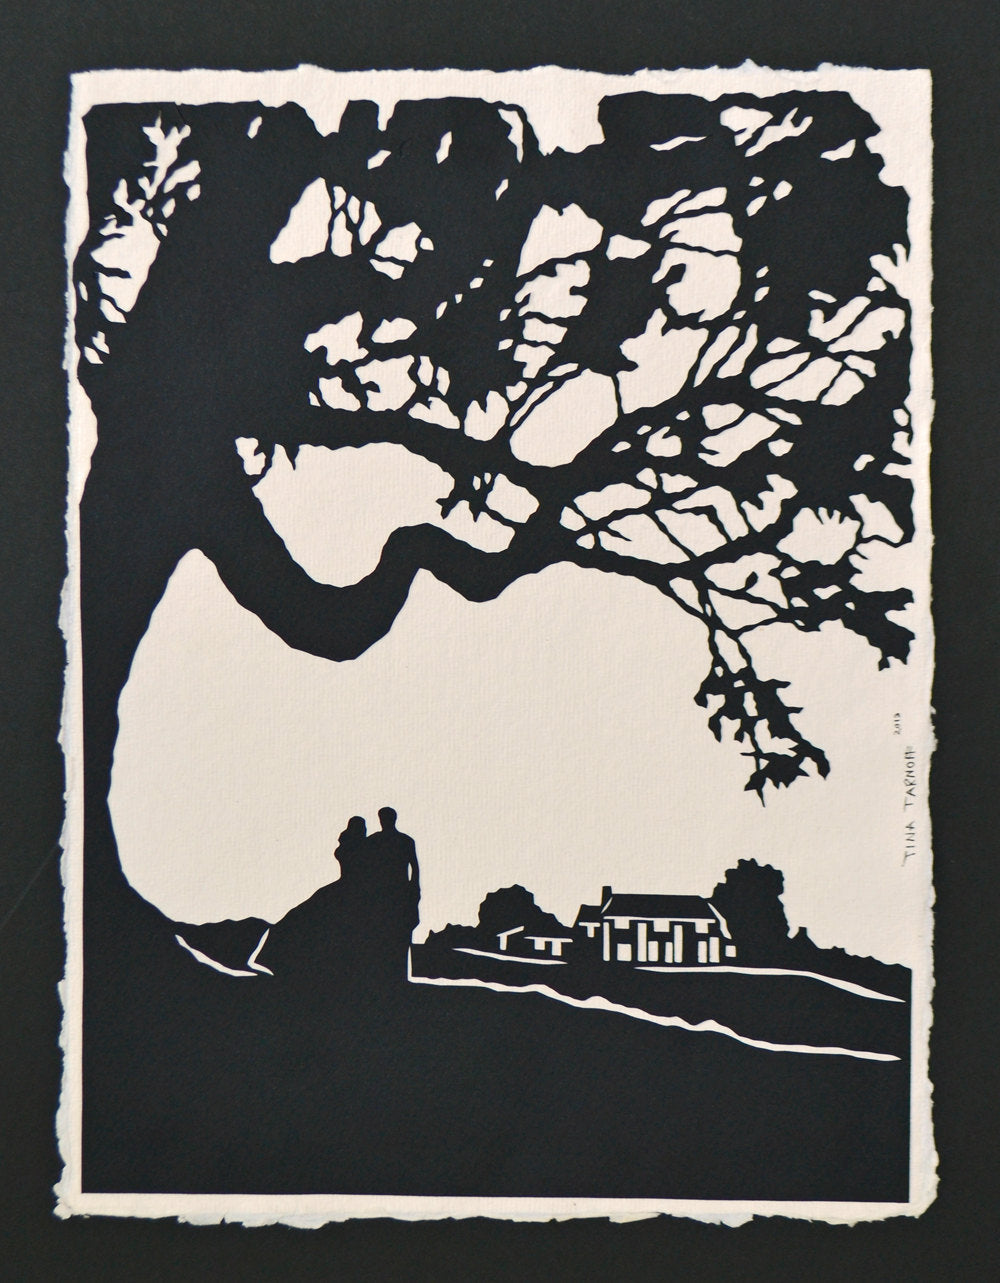 GONE WITH the WIND Papercut - Hand-Cut Silhouette